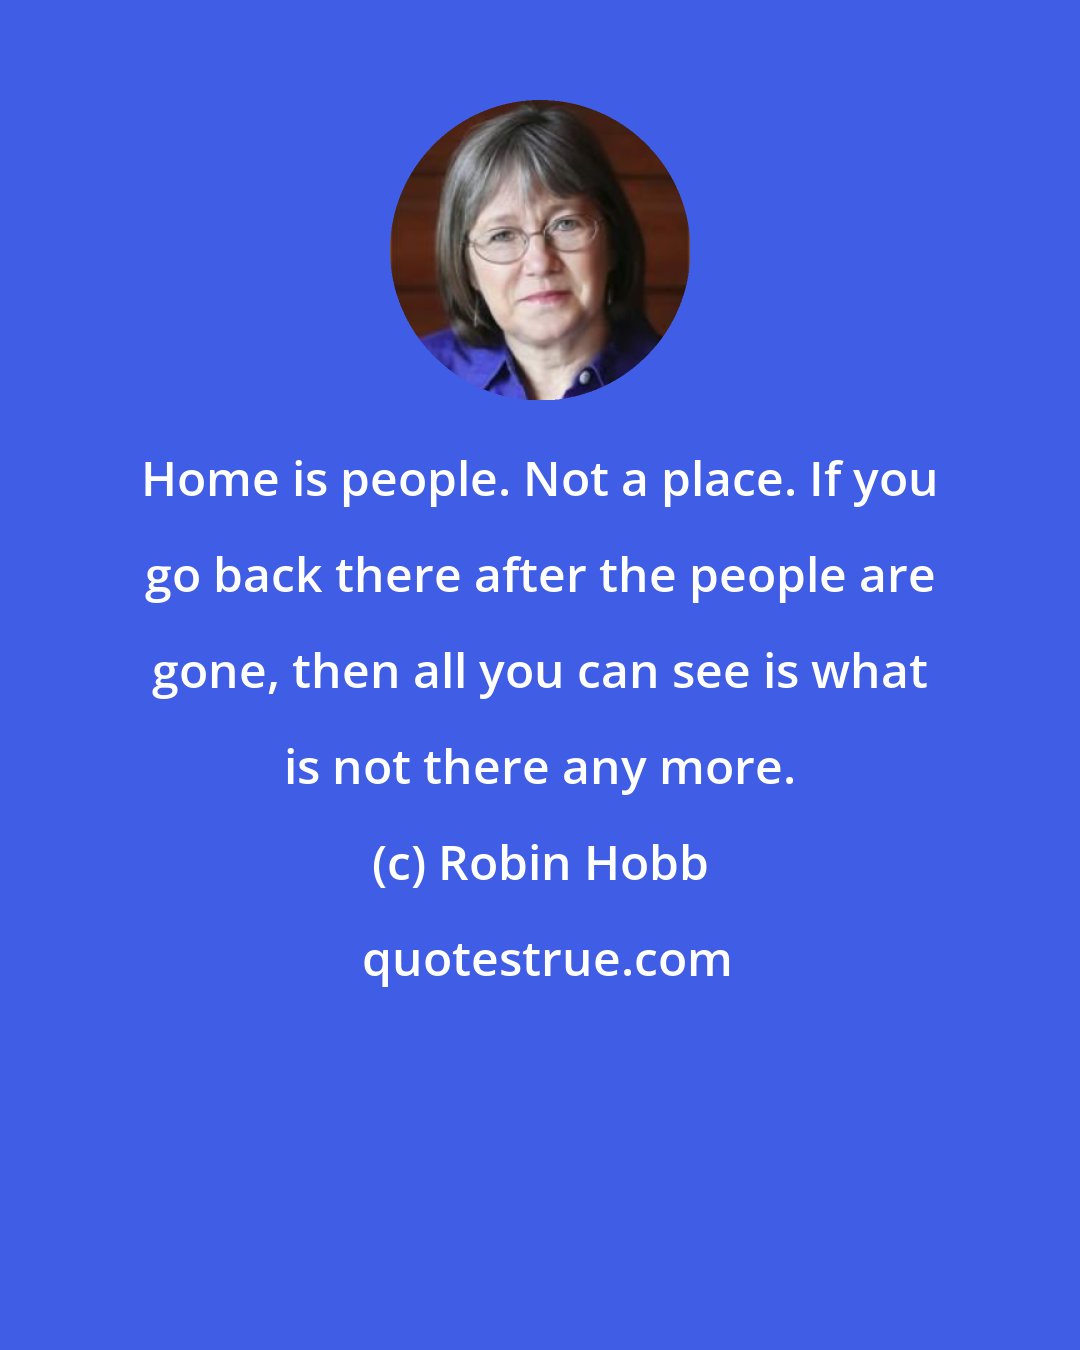 Robin Hobb: Home is people. Not a place. If you go back there after the people are gone, then all you can see is what is not there any more.